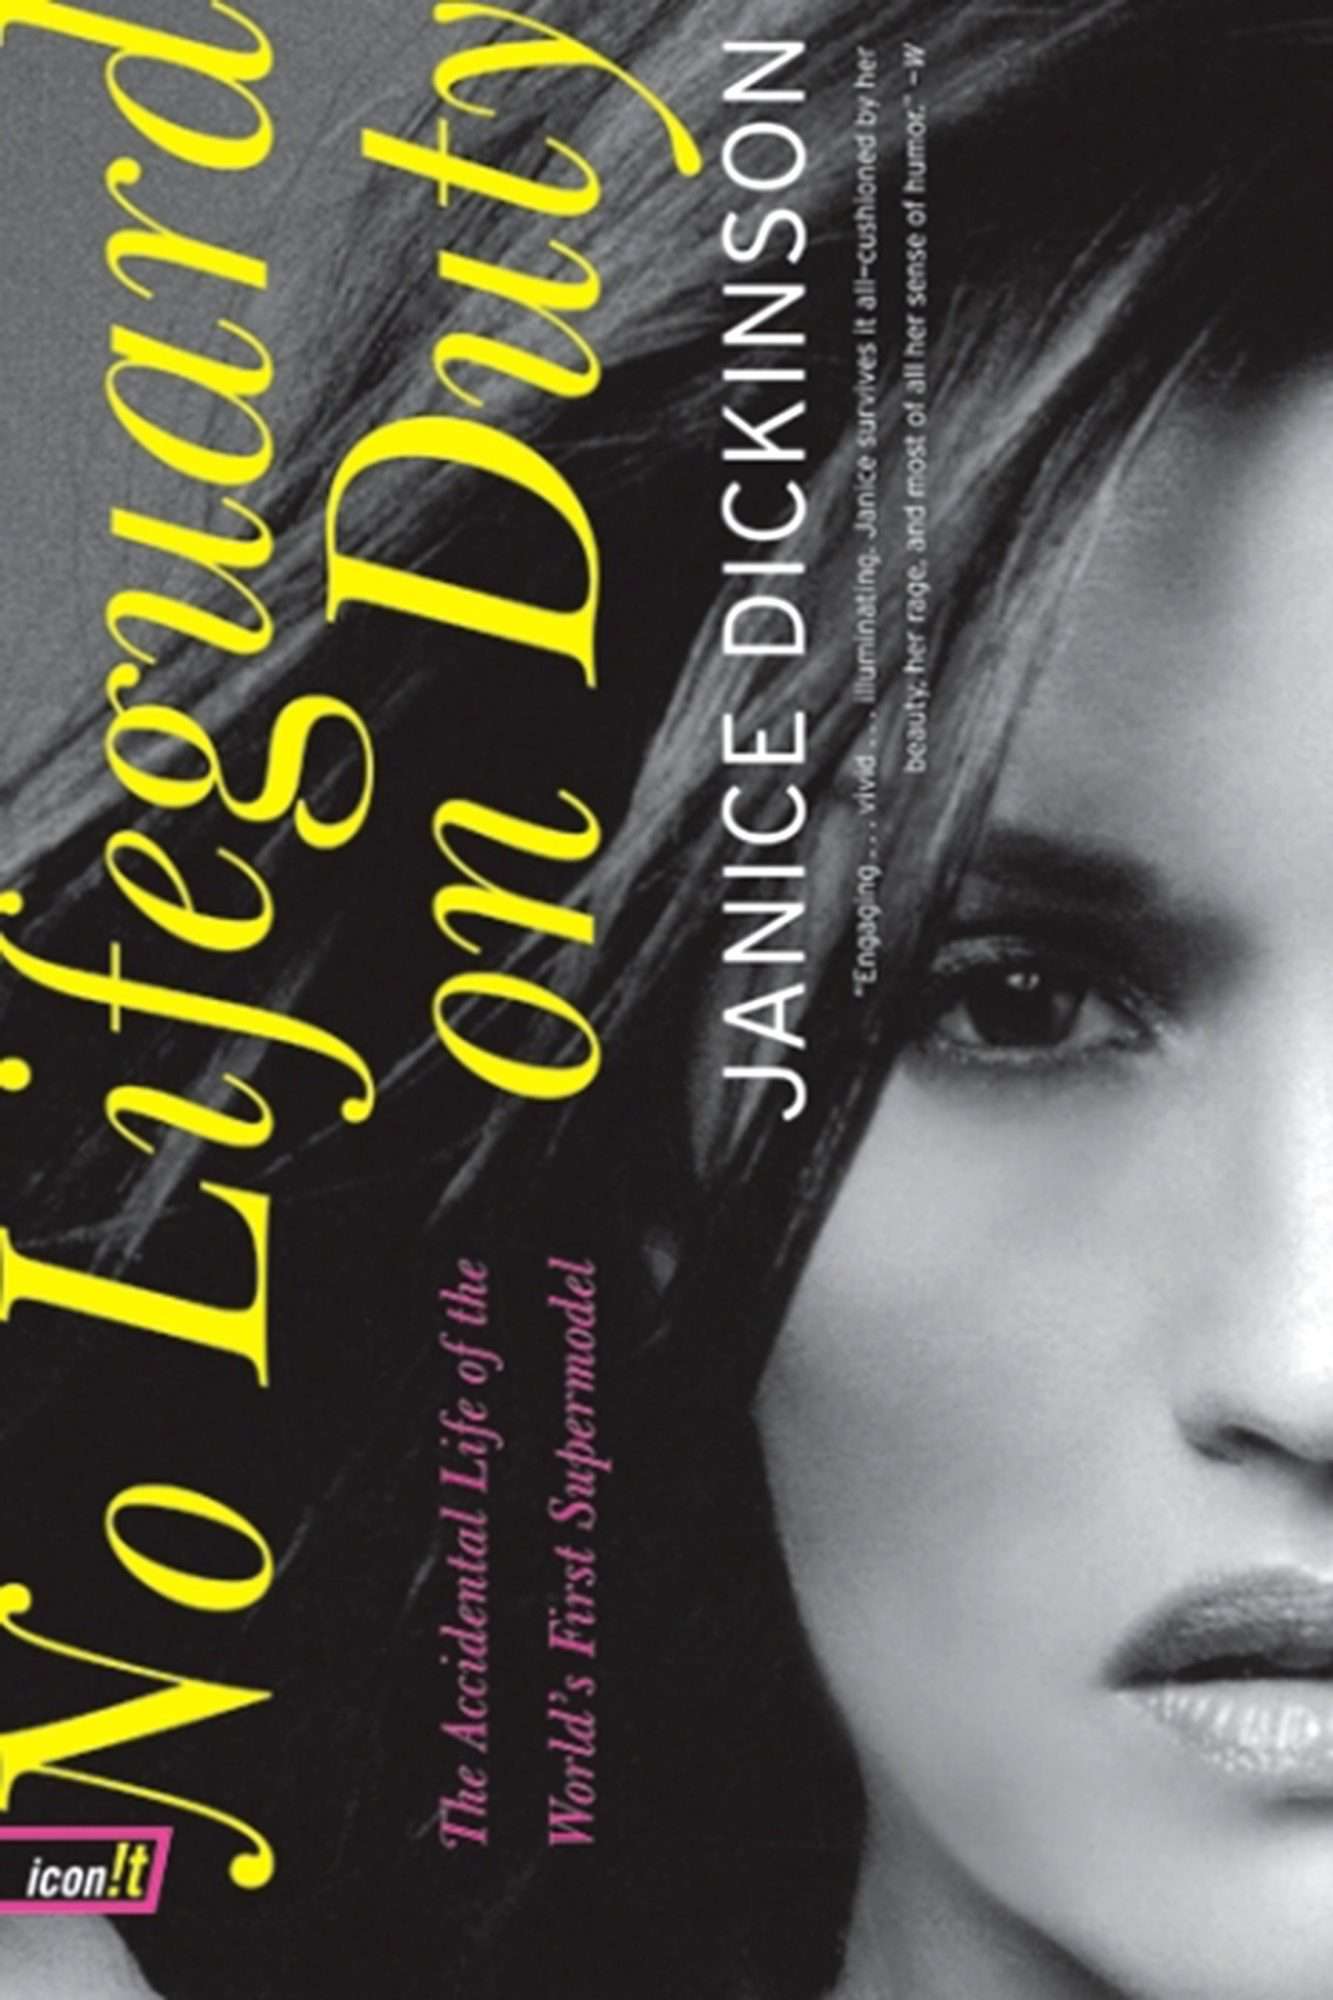 3. Janice Dickinson, No Lifeguard on Duty: The Accidental Life of the World's First Supermodel